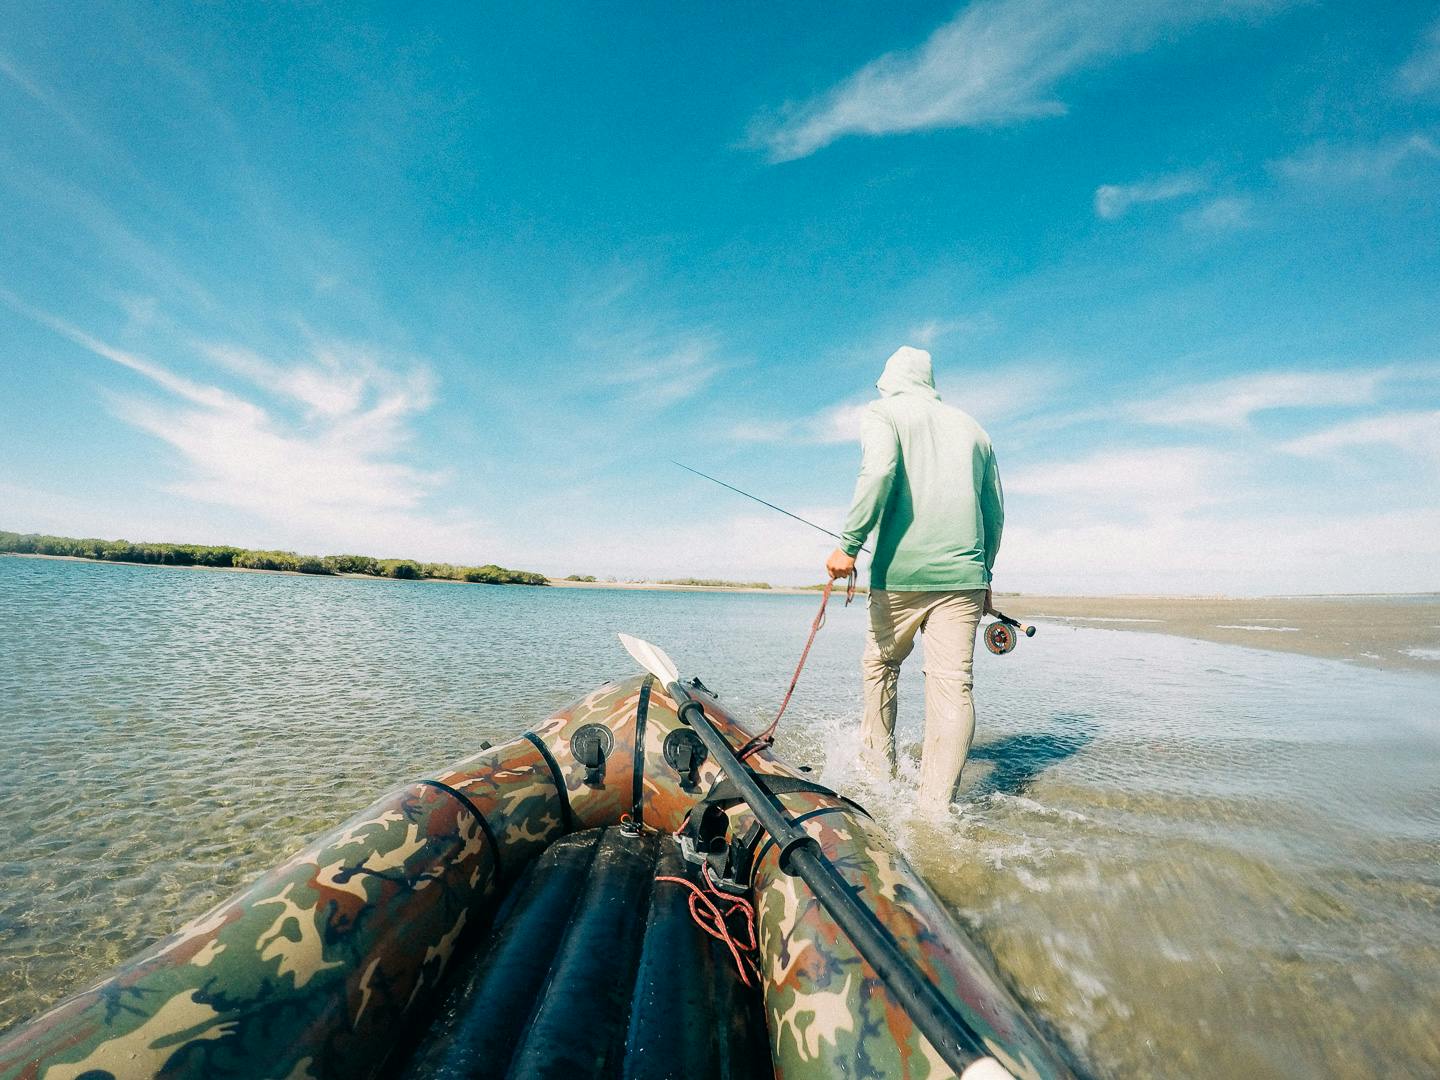 Paolo Marchesi Renews a Sense of Trust &amp; Appreciation for Others While Fly Fishing in Remote Regions of Baja